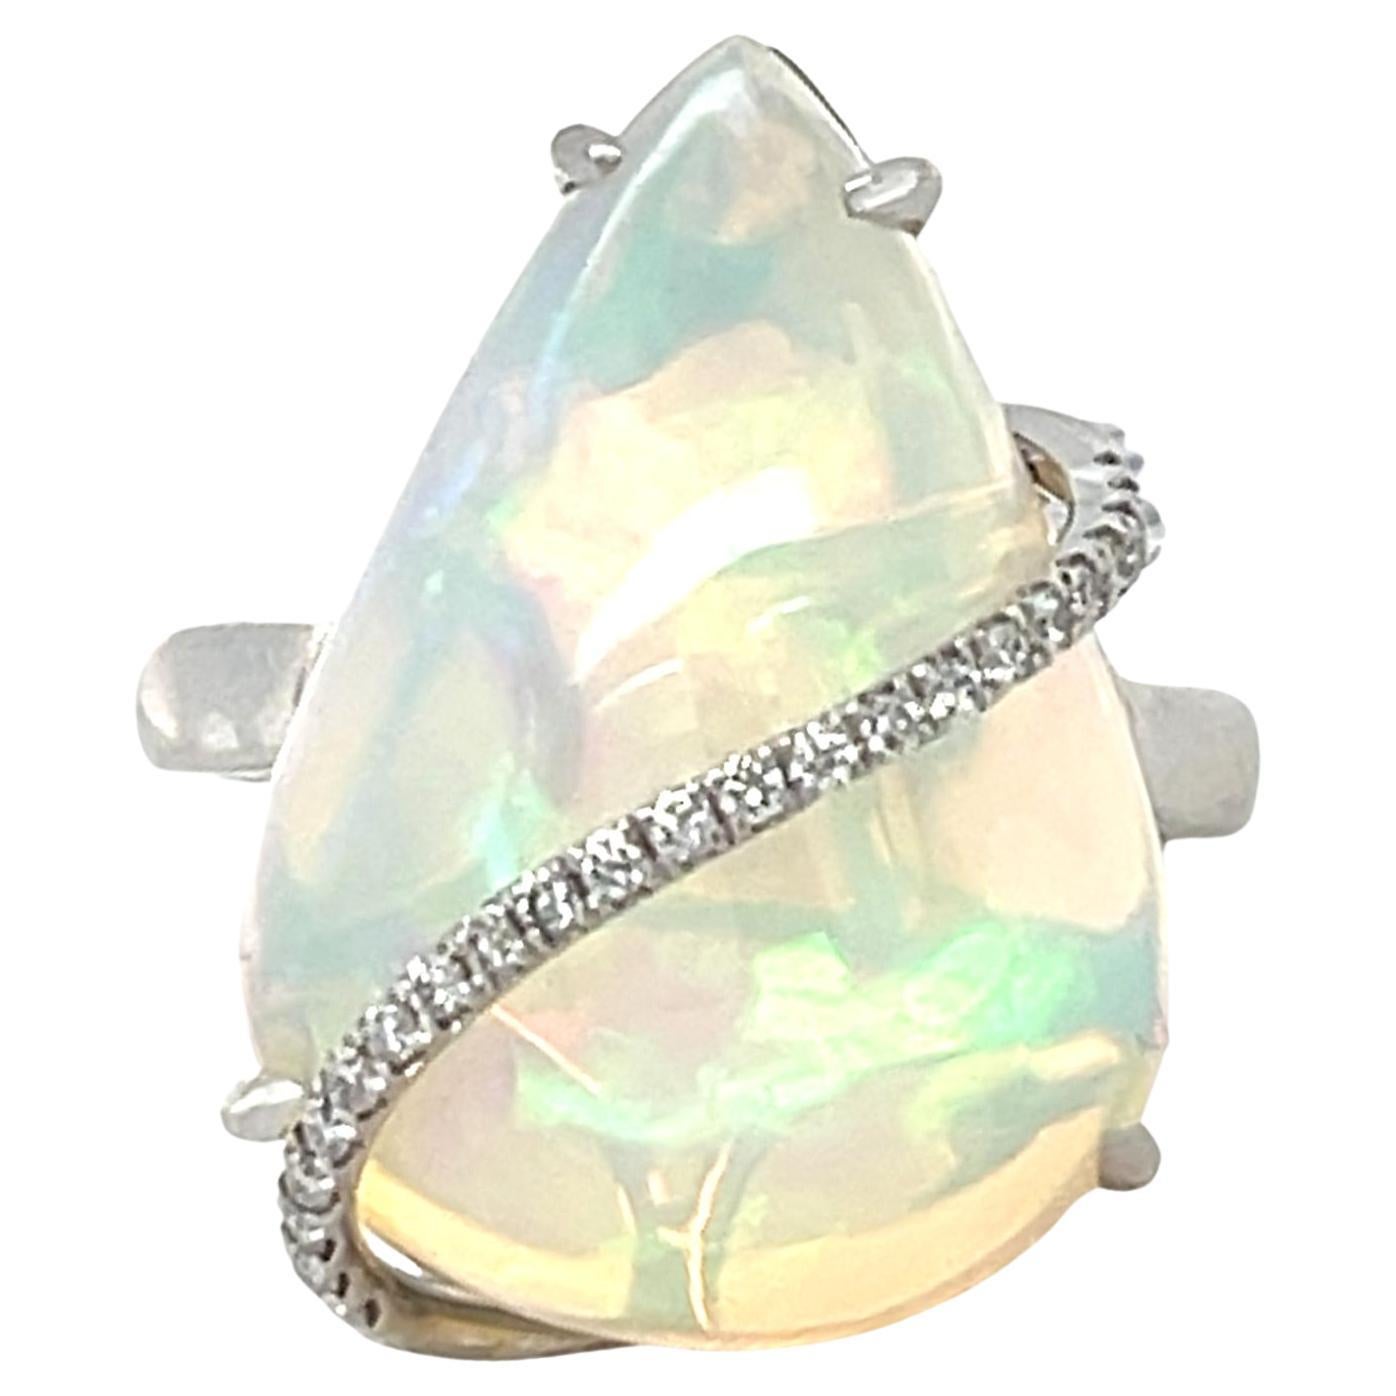 13 ct Ethiopian Opal and Diamond Ring in 14KW Gold 